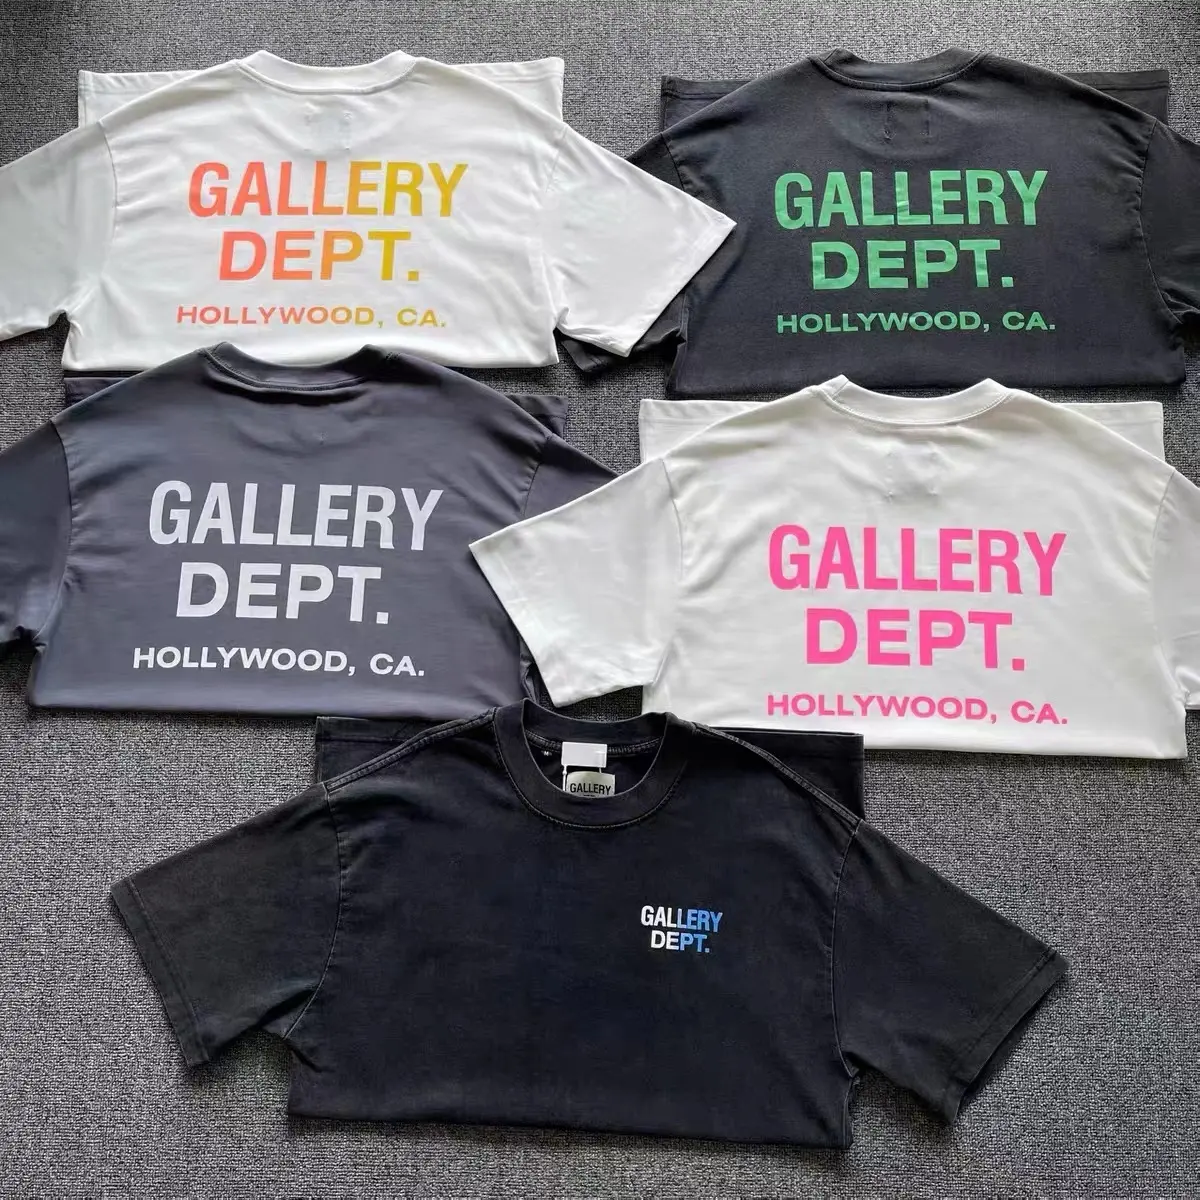 High quality Washed Black Gallery dept T-shrit Factory thick fabric shirt tshirts men women unisex gallery dept Tshirts tee